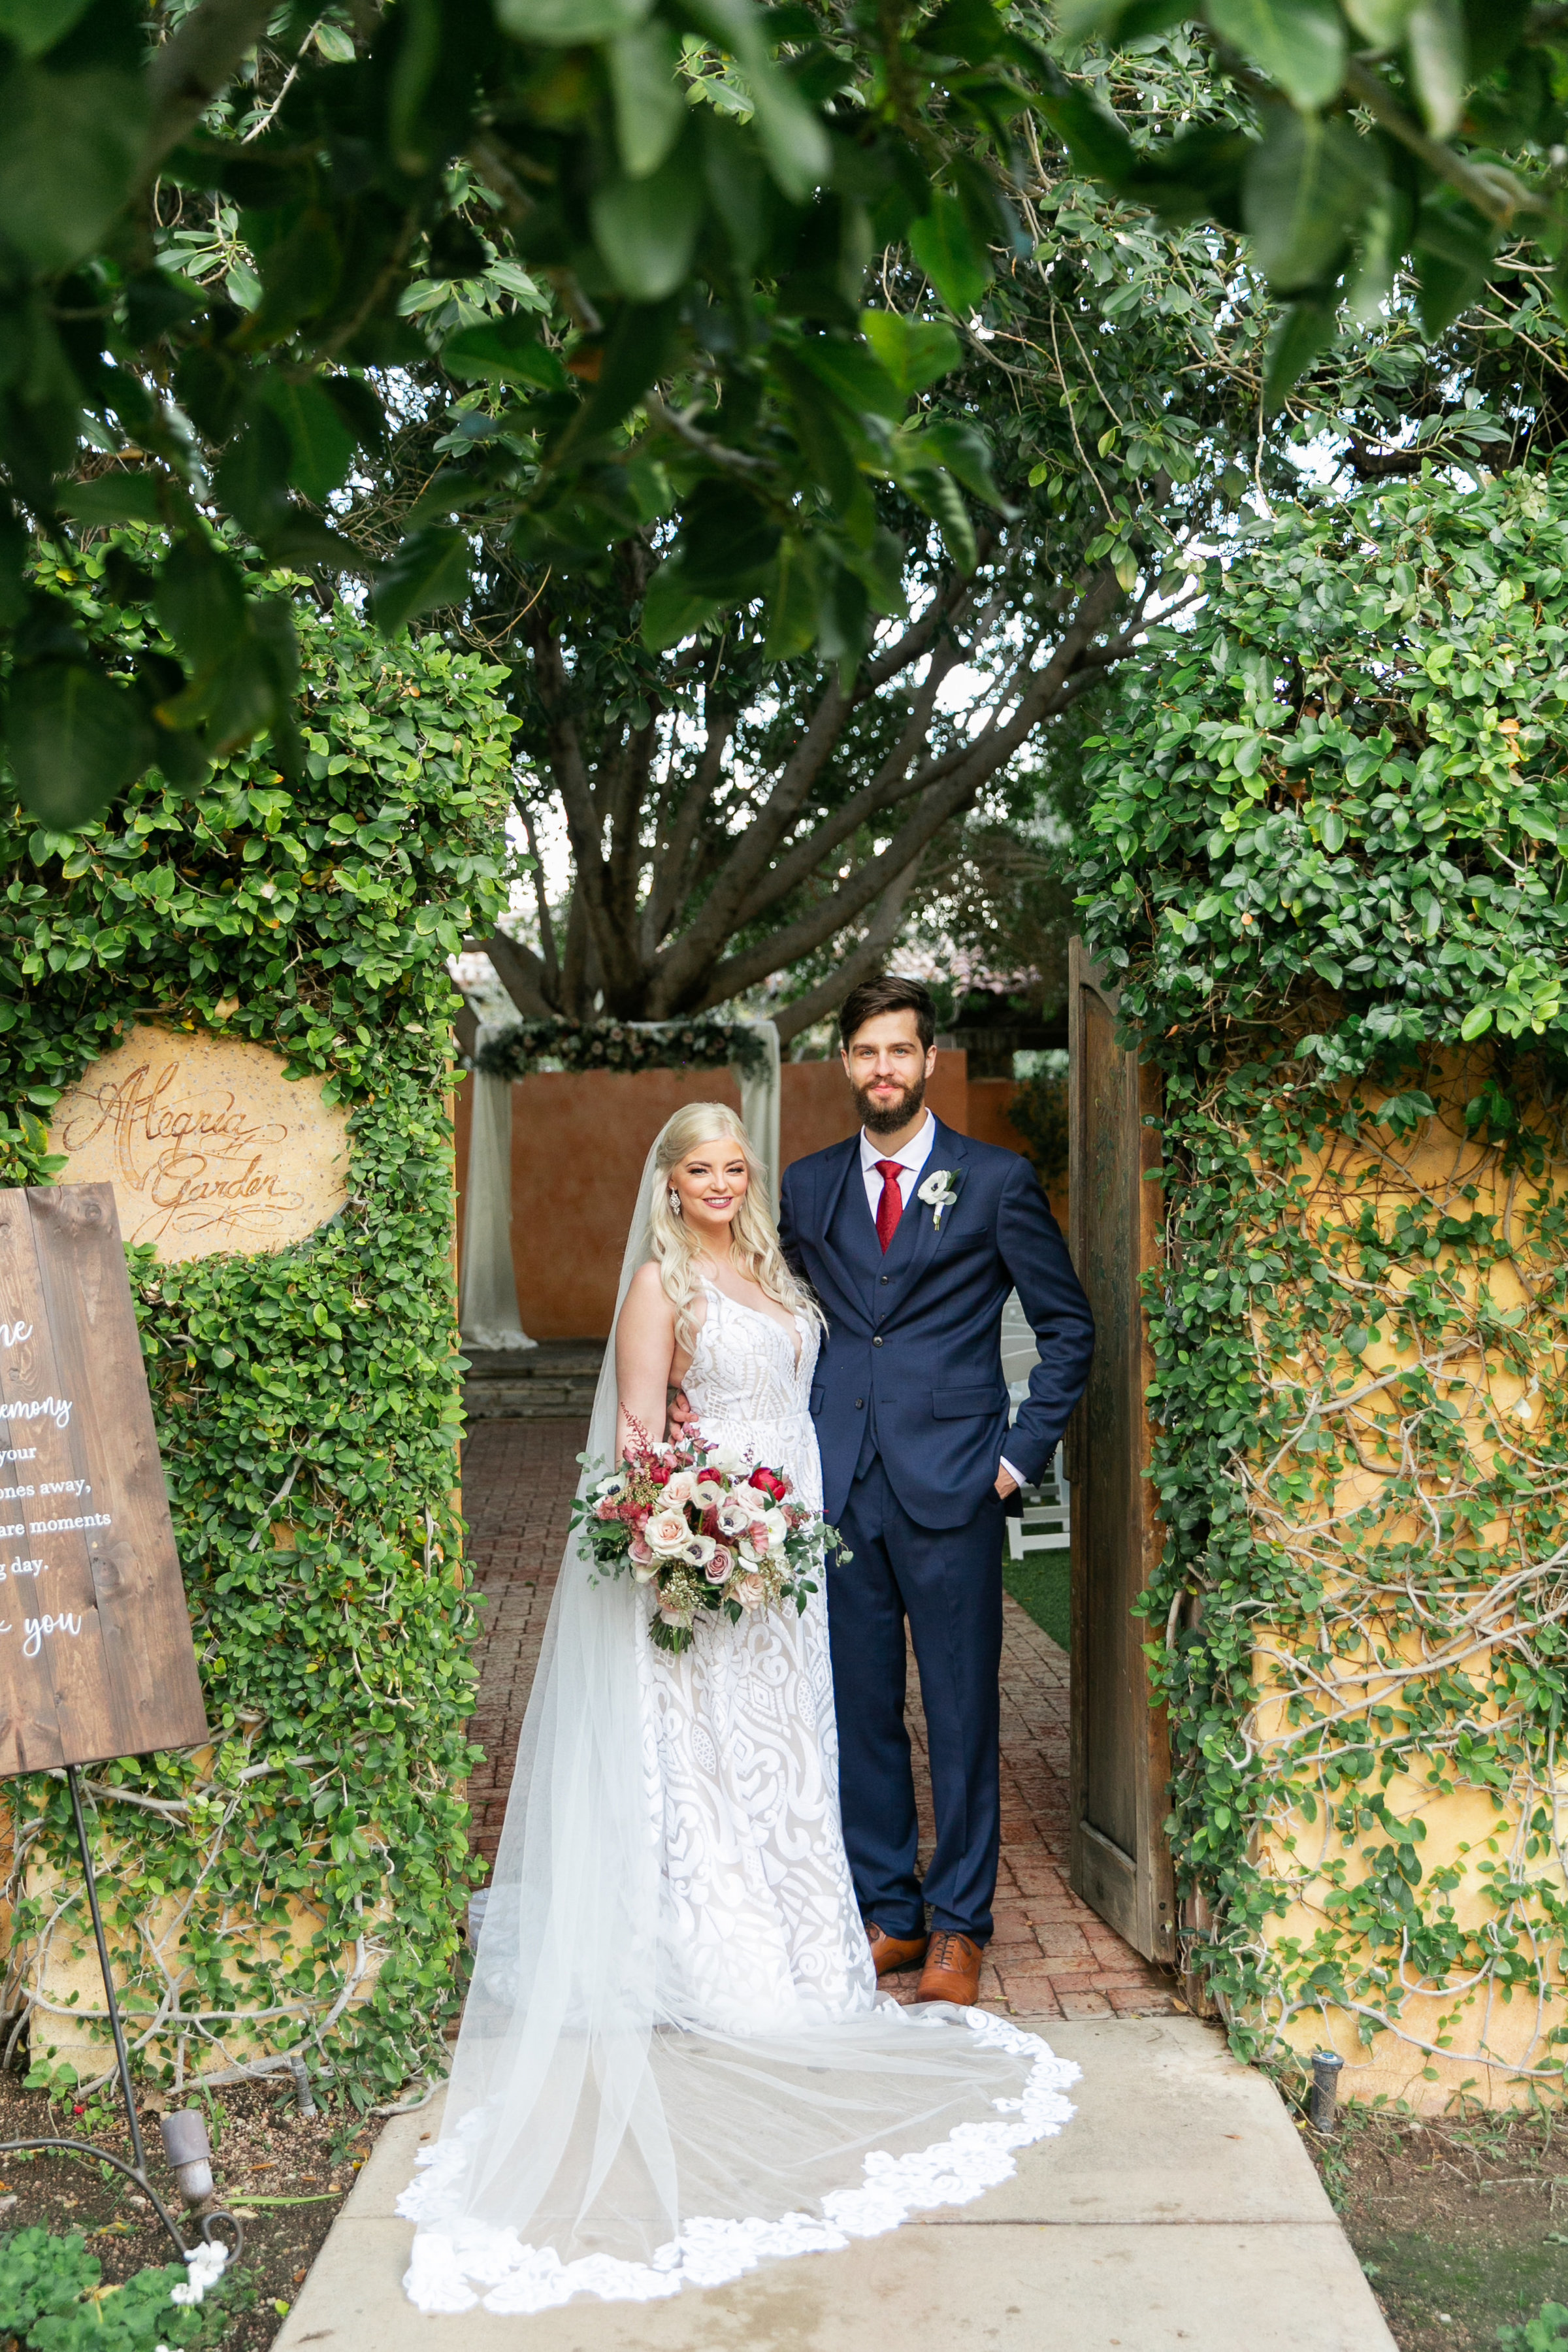 Karlie Colleen Photography - The Royal Palms Wedding - Some Like It Classic - Alex & Sam-470